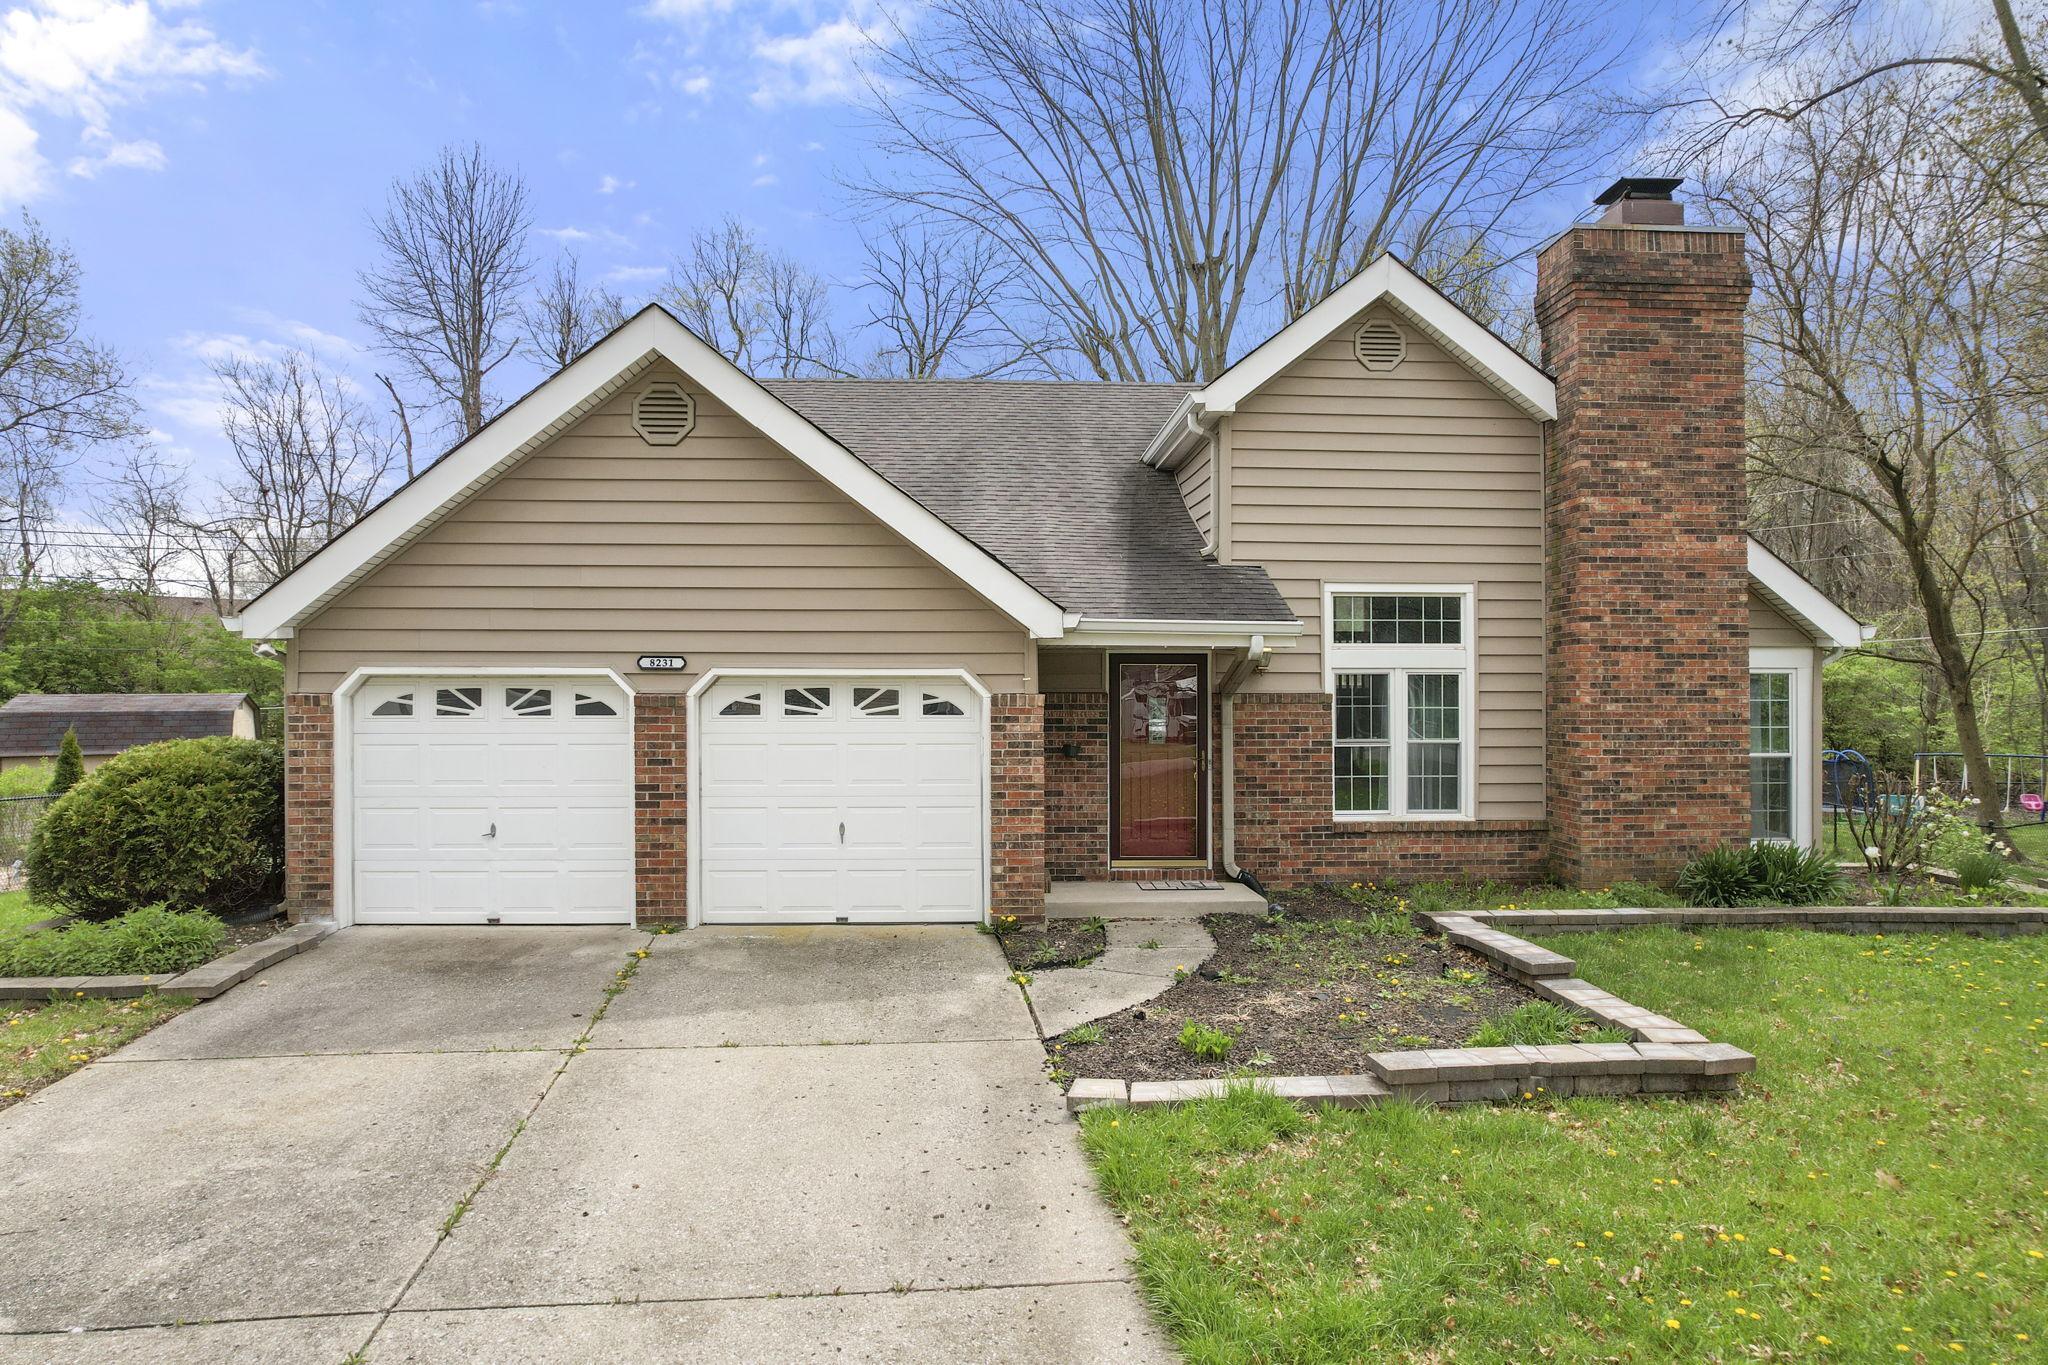 Photo one of 8231 Bold Forbes Ct Indianapolis IN 46217 | MLS 21973173